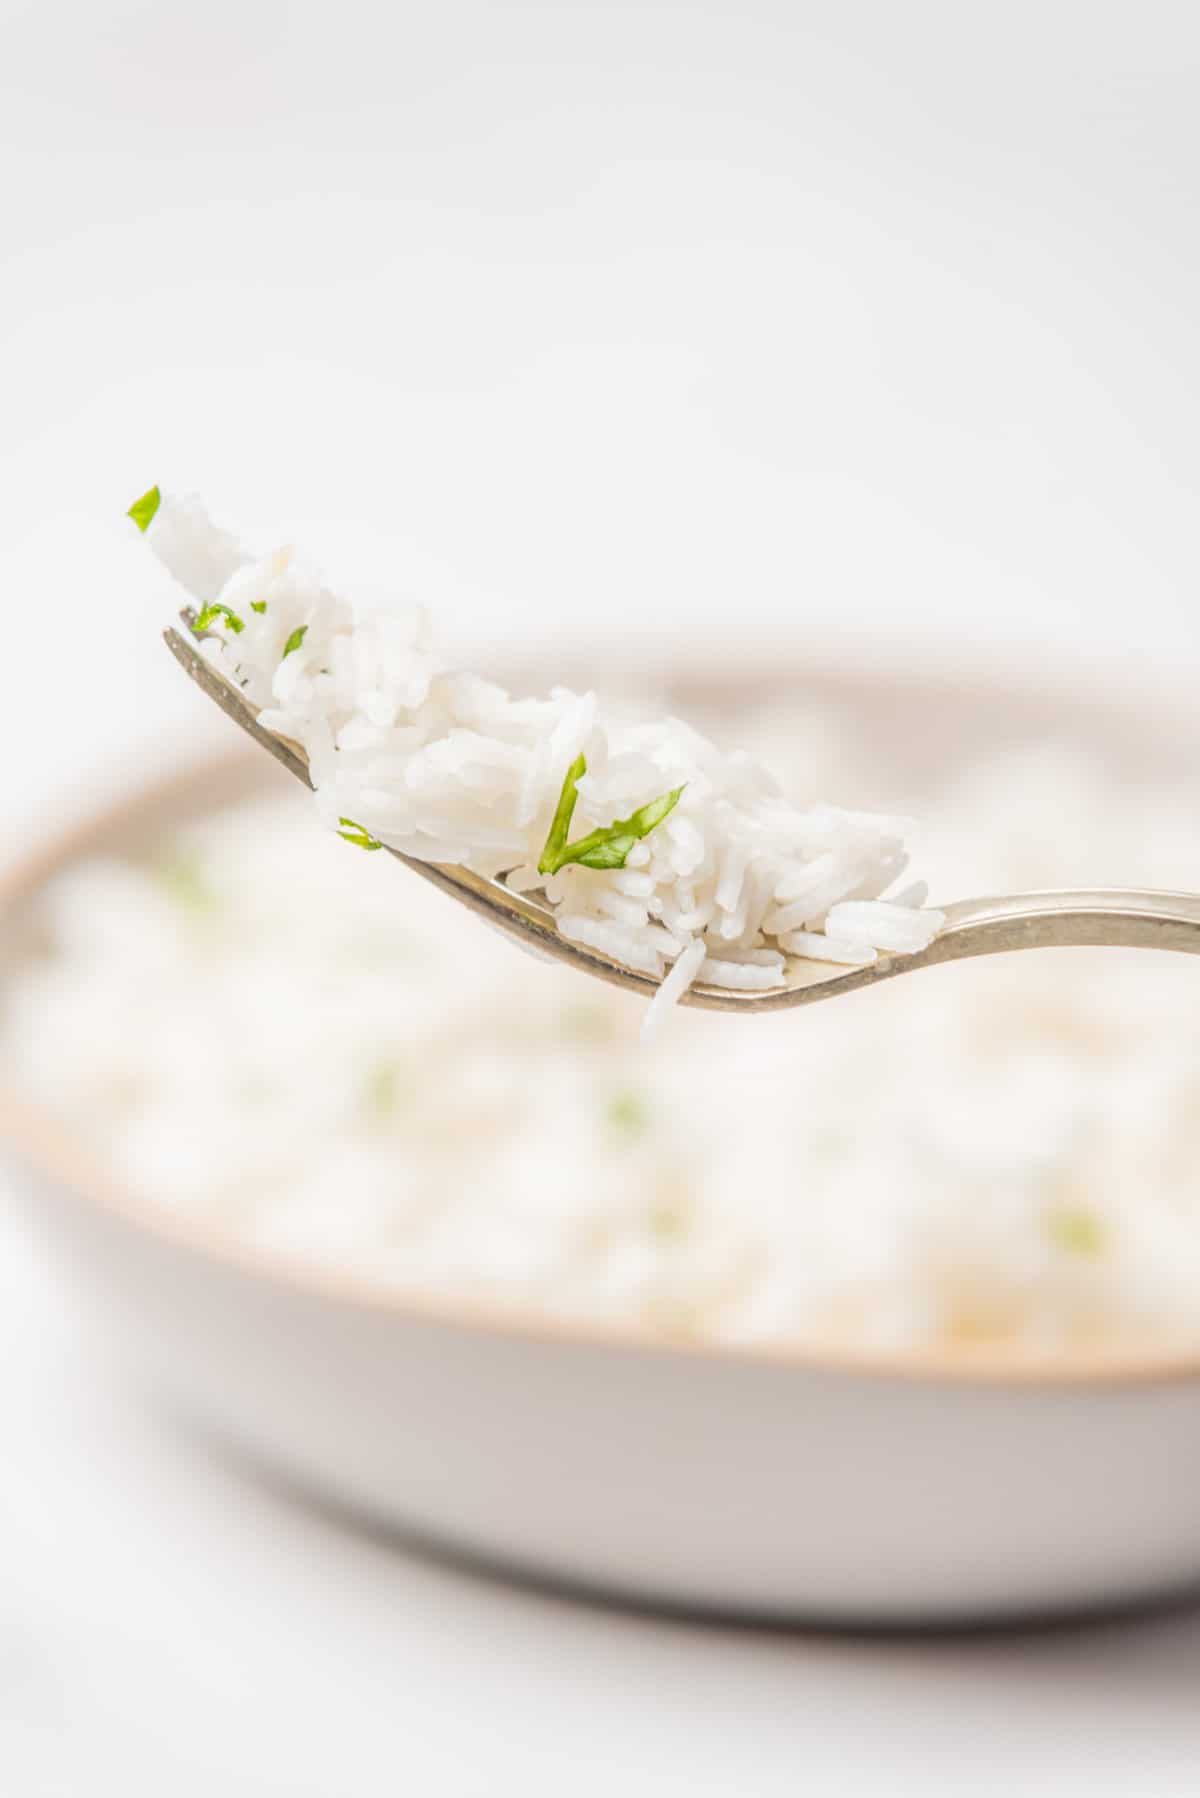 A closeup image of a spoonful of white rice in front of a bowl of white rice.